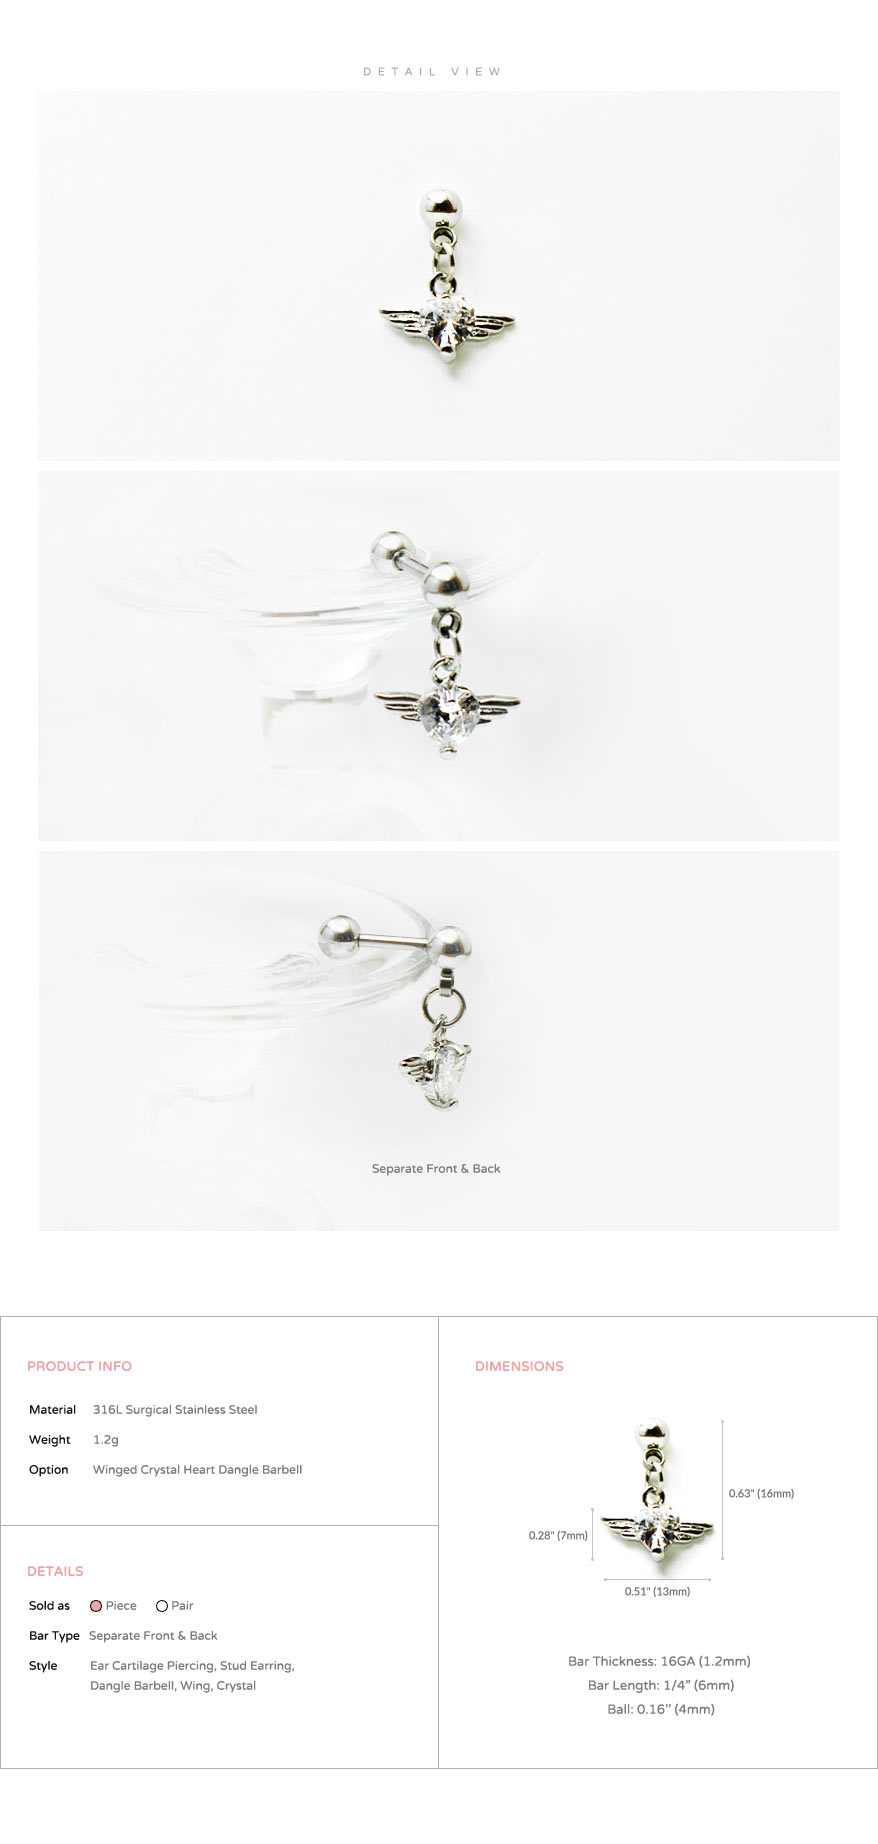 ear_studs_piercing_Cartilage_earrings_16g_316l_Surgical_Stainless_Steel_korean_asian_style_jewelry_barbell_dangle_crystal_heart_wing_3